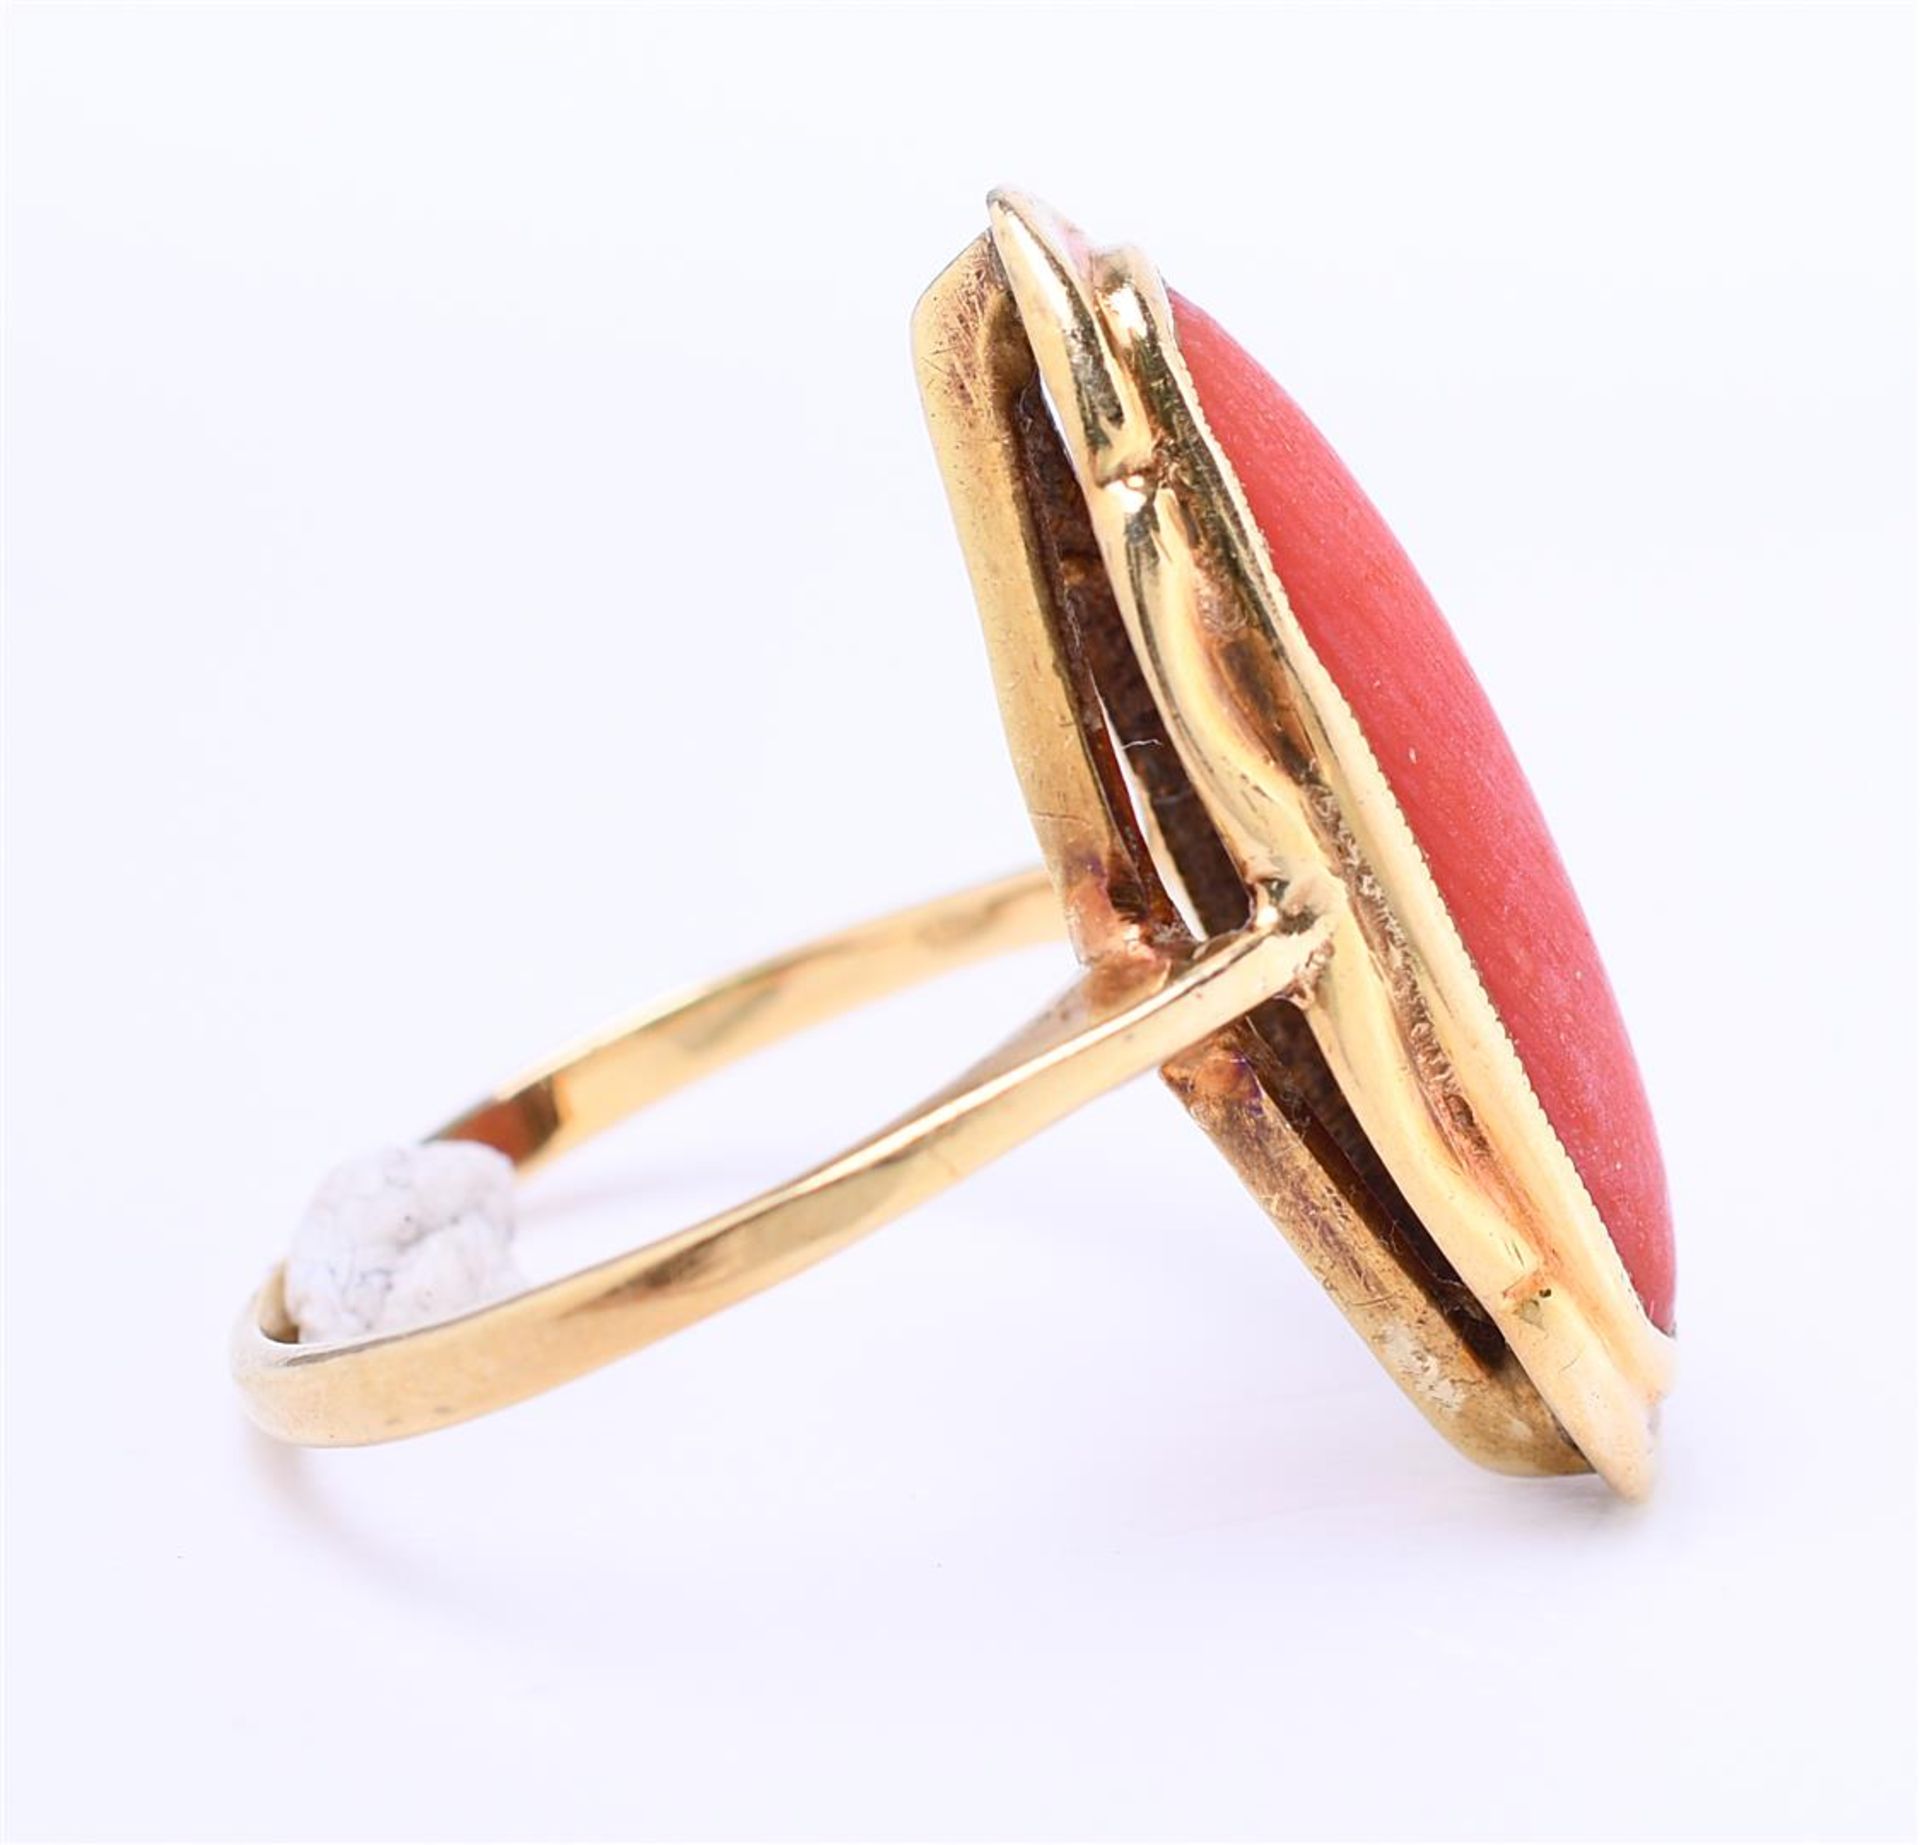 14 kt yellow gold scalloping set with marquise cut red coral. Ring size 50 / 16 mm - Image 4 of 4